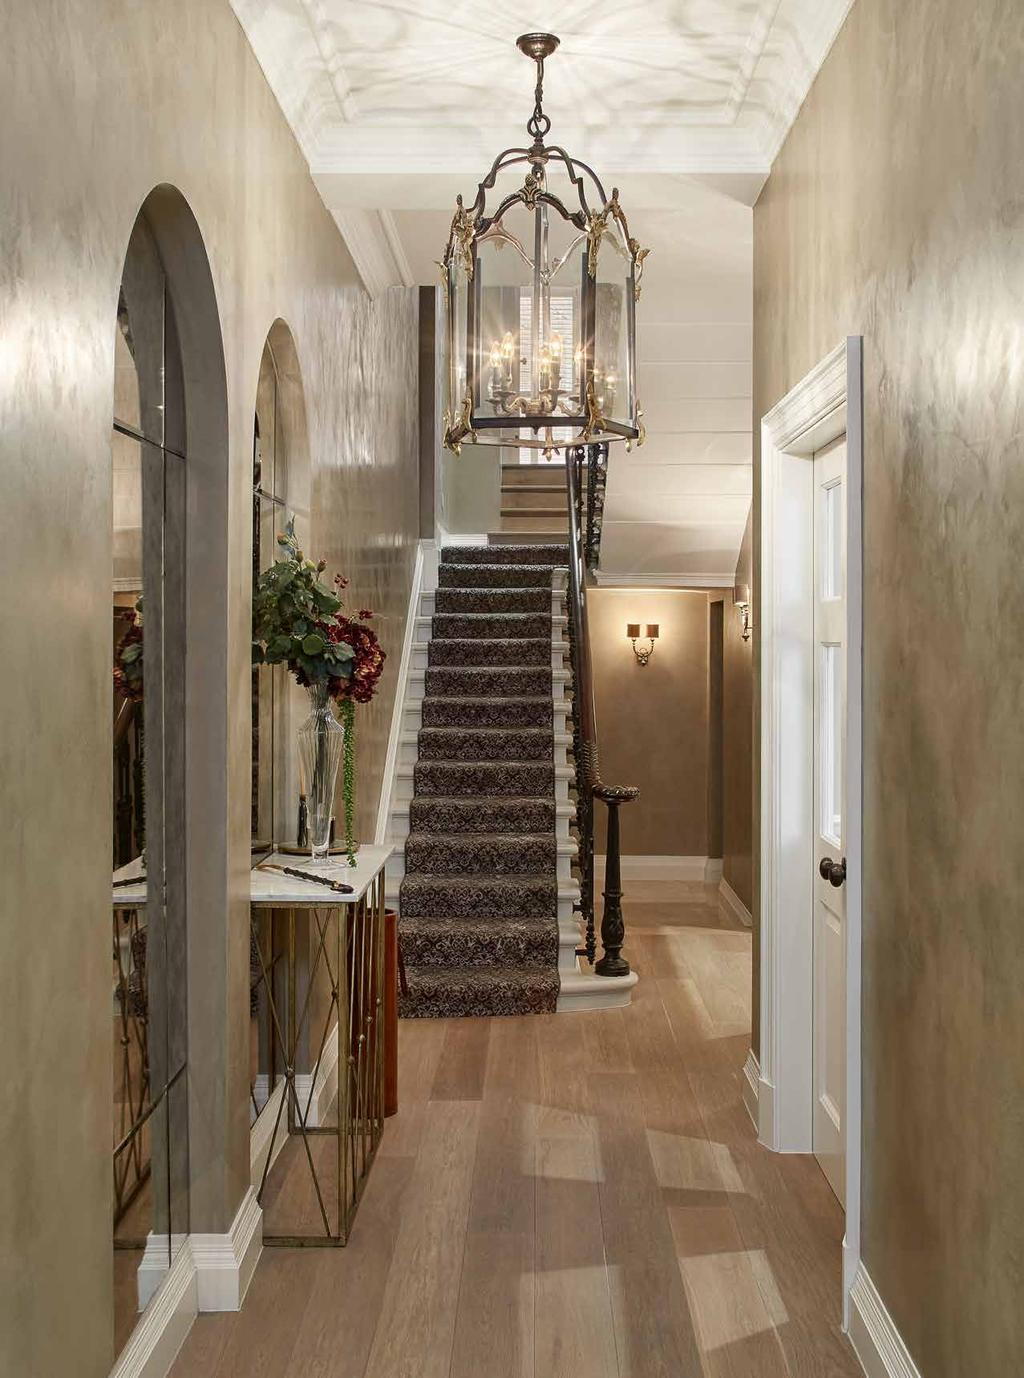 ENTRANCE HALLWAY & FOYER This entrance sets the tone of the house with the